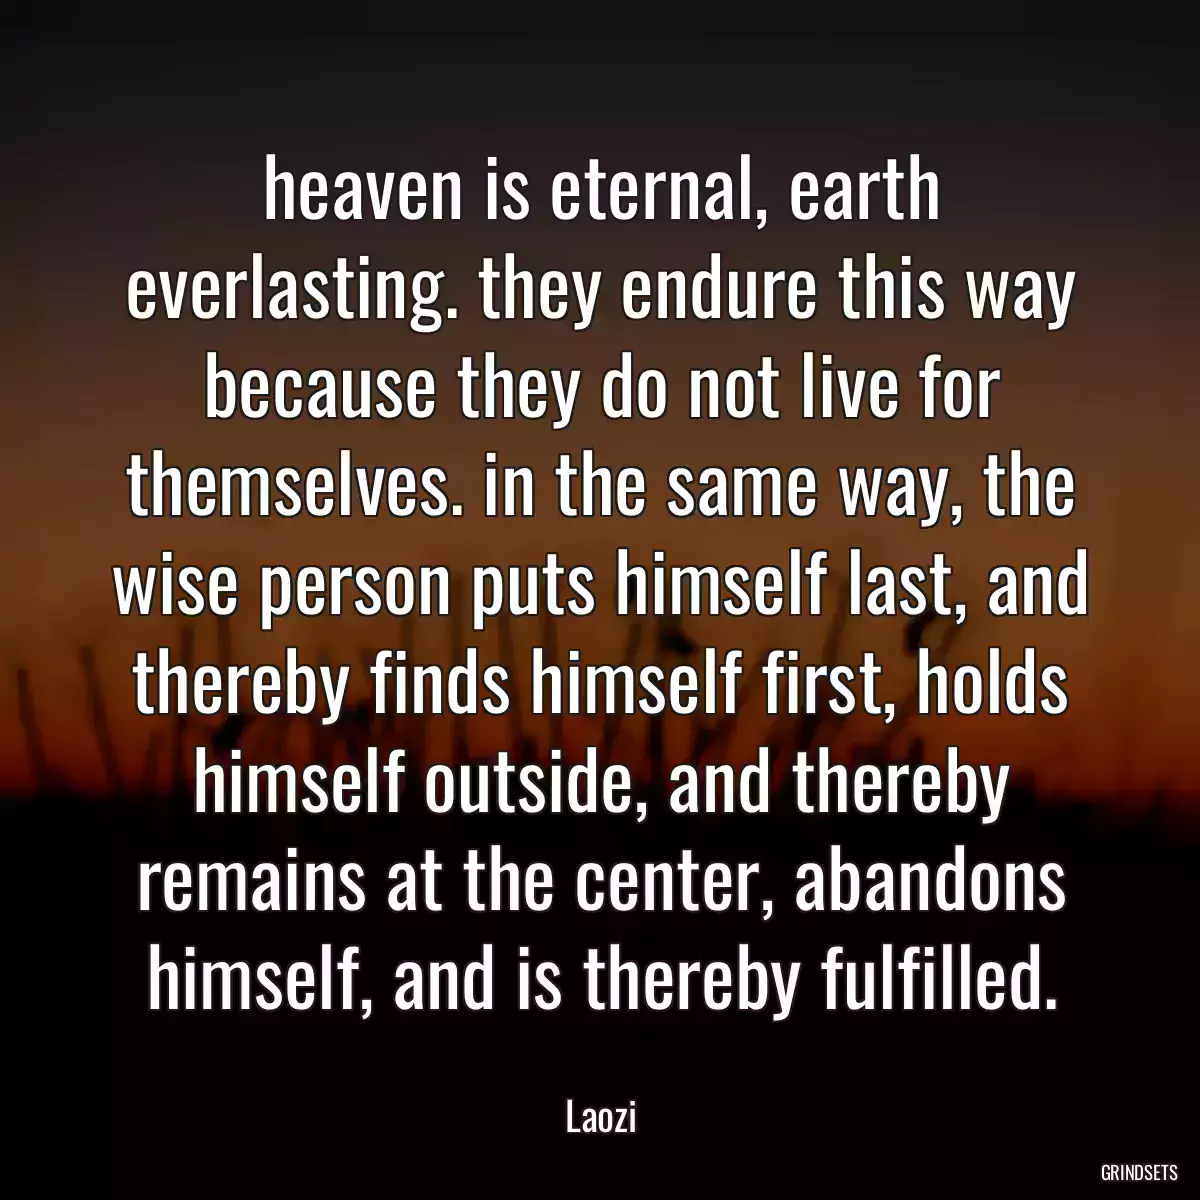 heaven is eternal, earth everlasting. they endure this way because they do not live for themselves. in the same way, the wise person puts himself last, and thereby finds himself first, holds himself outside, and thereby remains at the center, abandons himself, and is thereby fulfilled.